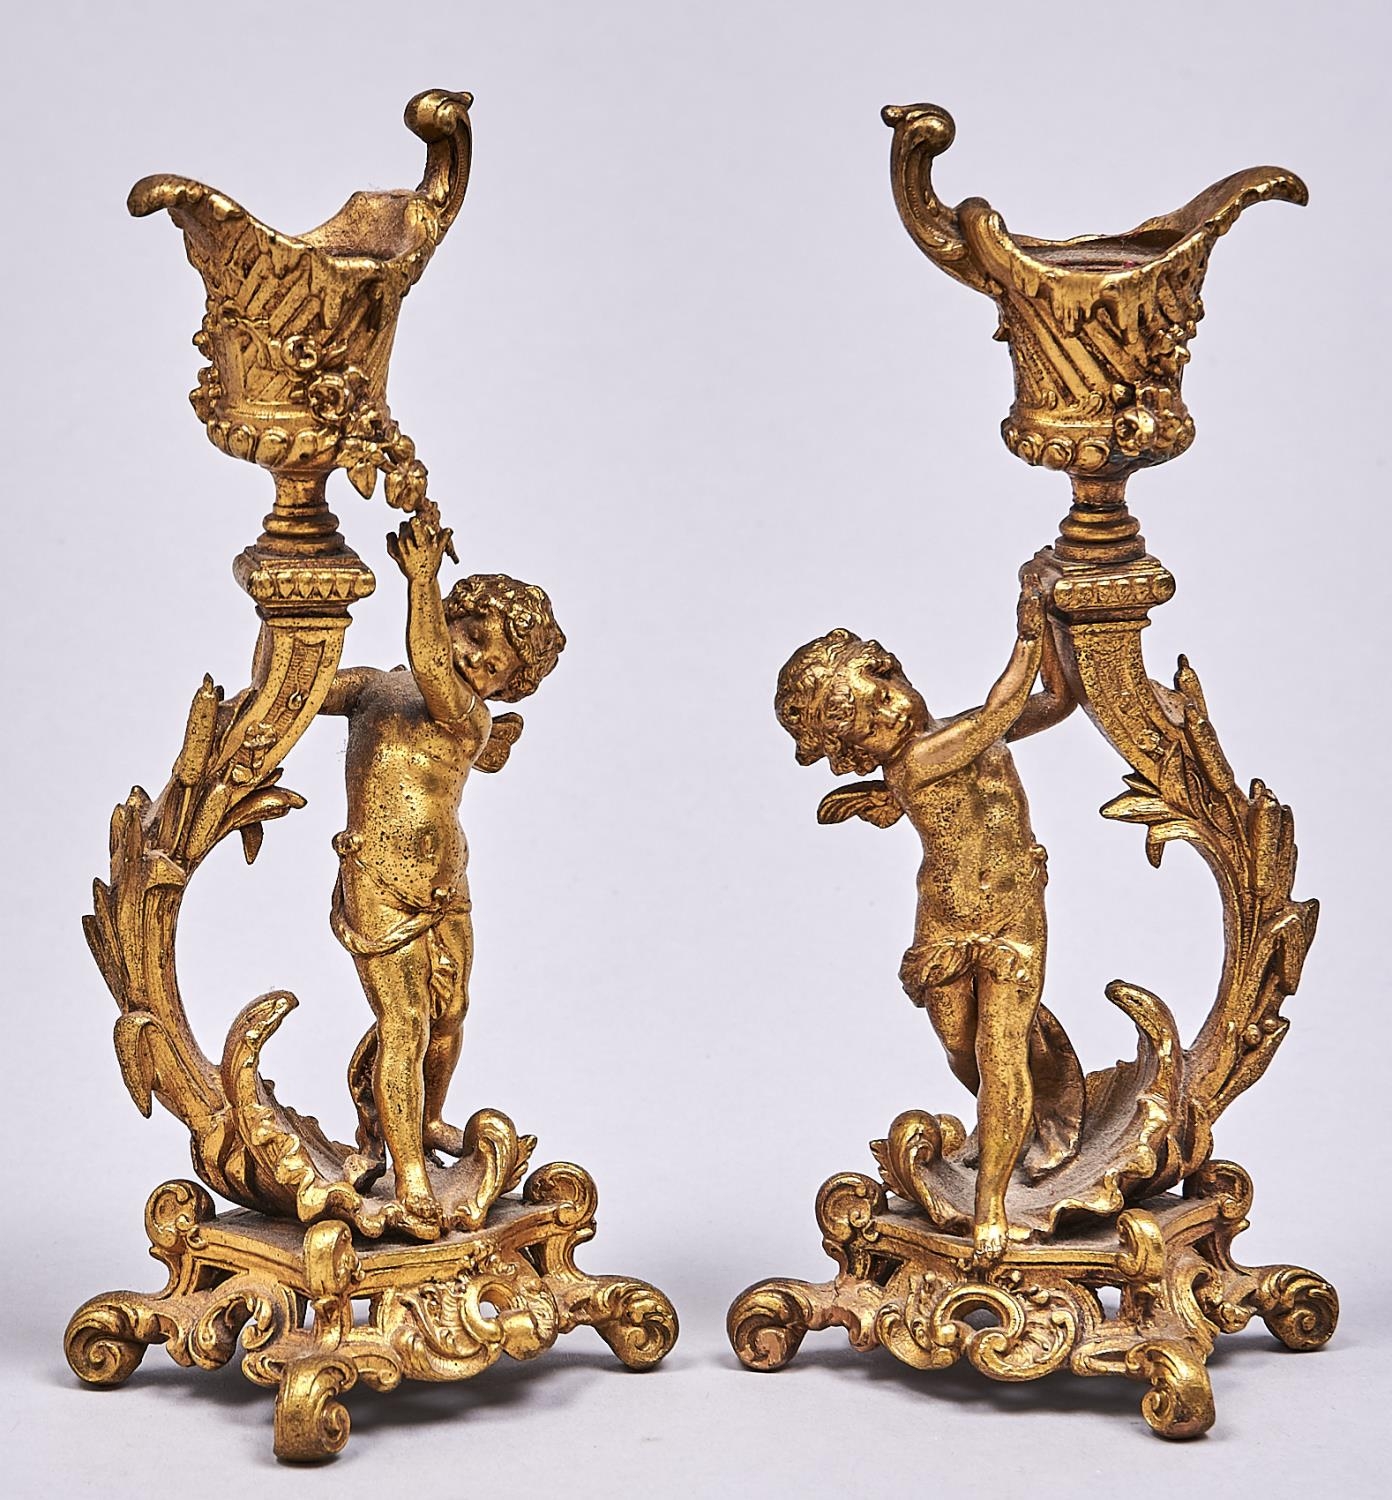 A pair of French fin de siecle spelter gilt Putto figural candlesticks in rococo style, c1910, in